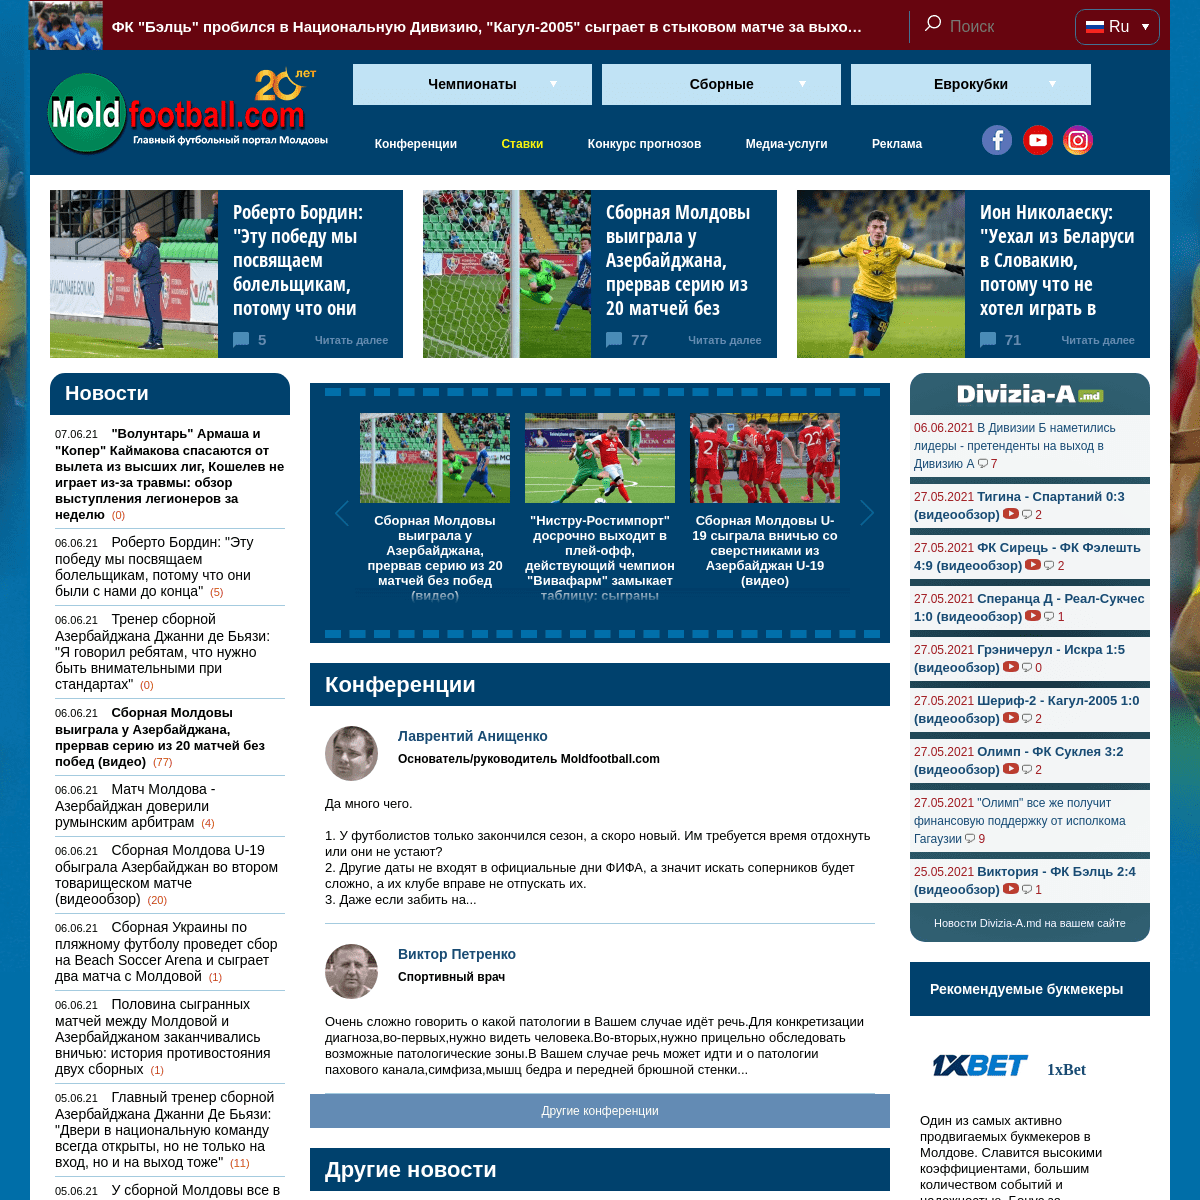 A complete backup of https://moldfootball.com